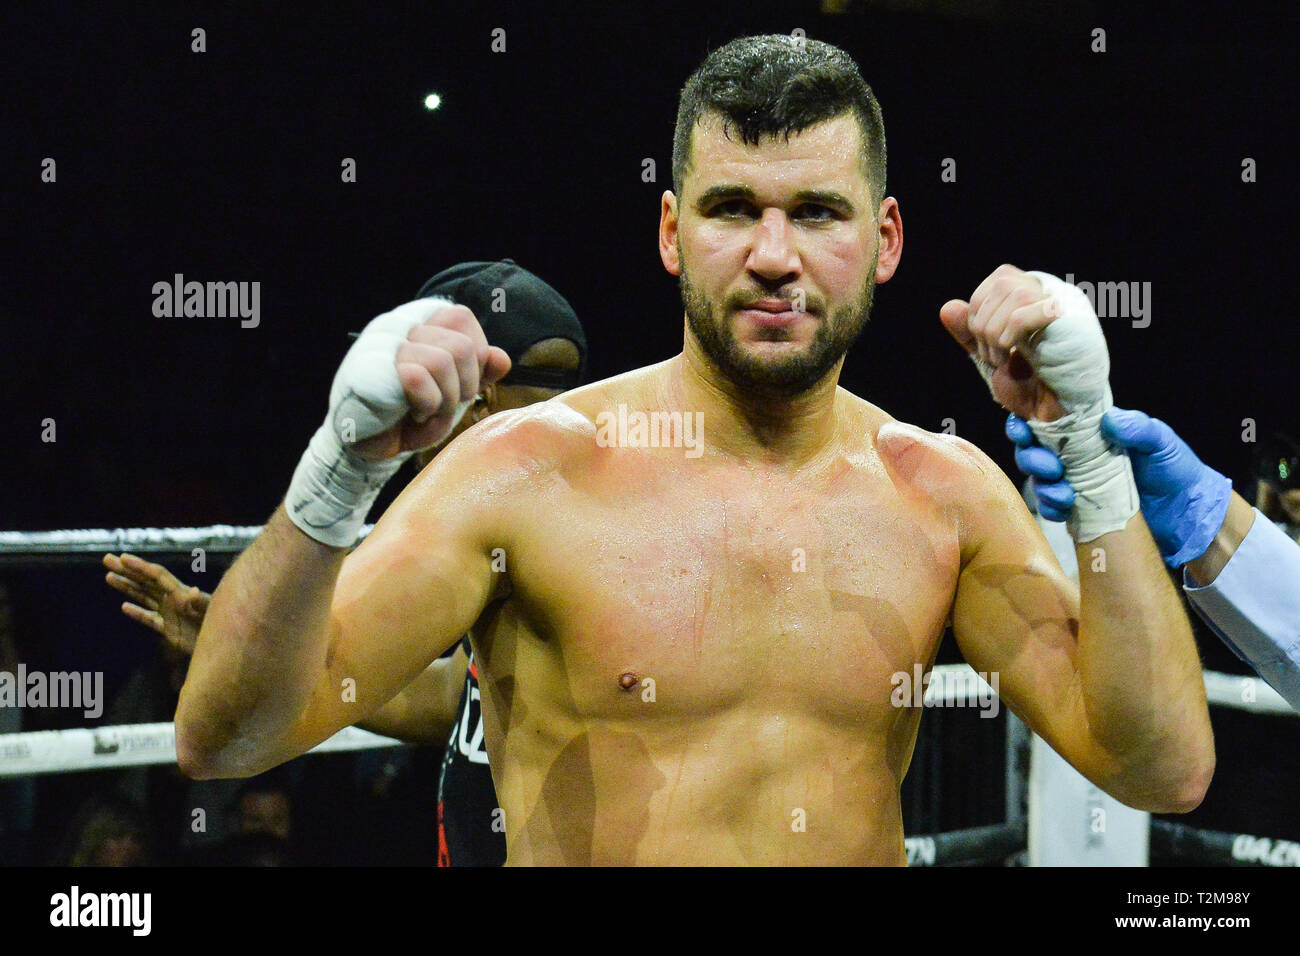 Nick Fantauzzi seen after the match against Maximiliano Corso during the takeover boxing event presented by Lee Baxter promotions at Mattamy Athletic Centre Toronto Stock Photo